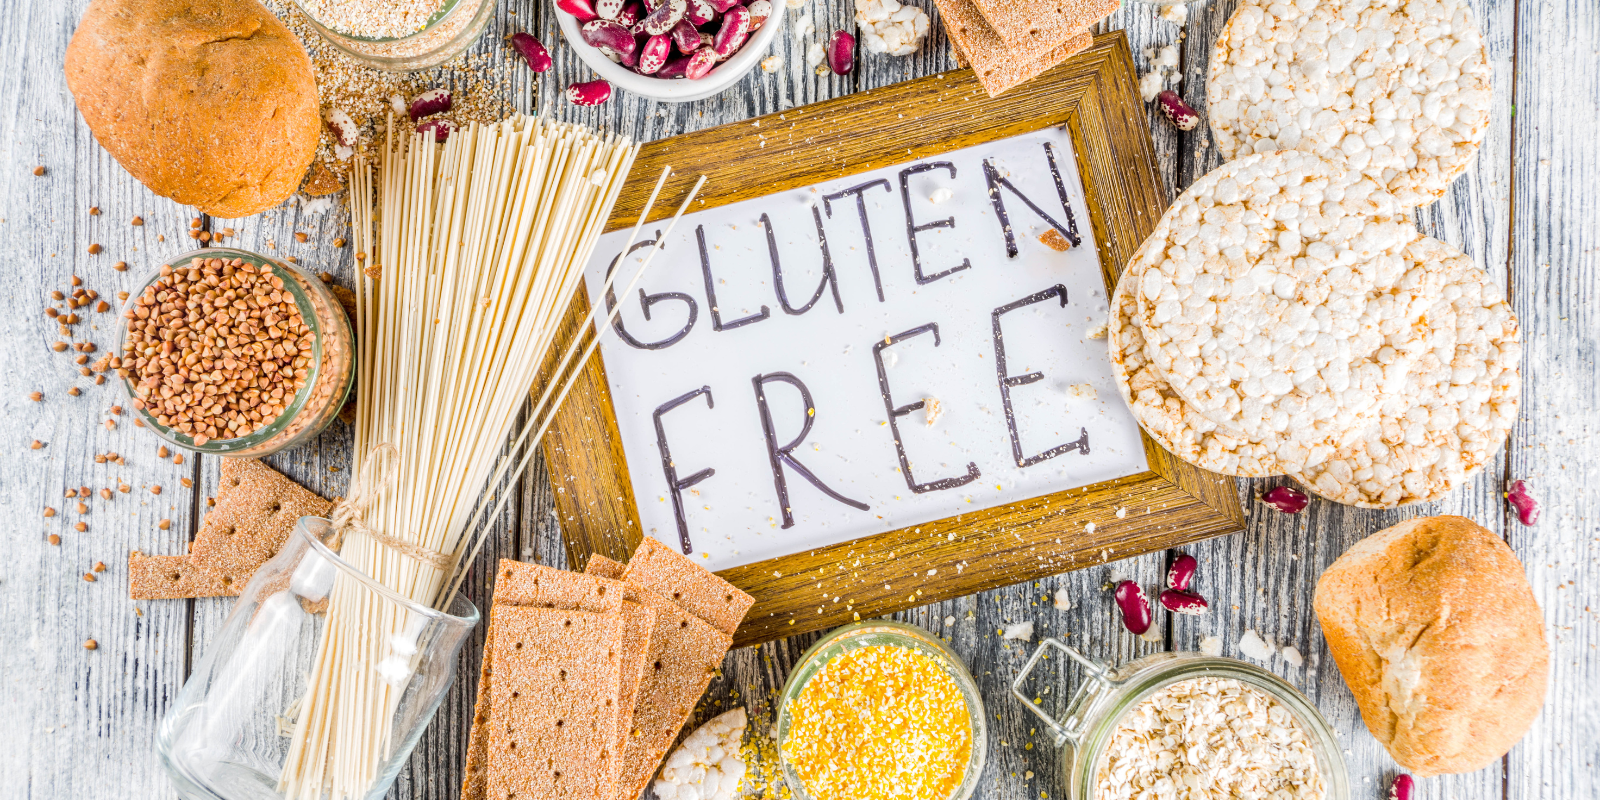 A collection of gluten-free items on a gray wood background, things like rice cakes, bowls of seeds, etc. A whiteboard sign in the middle says "gluten FREE".